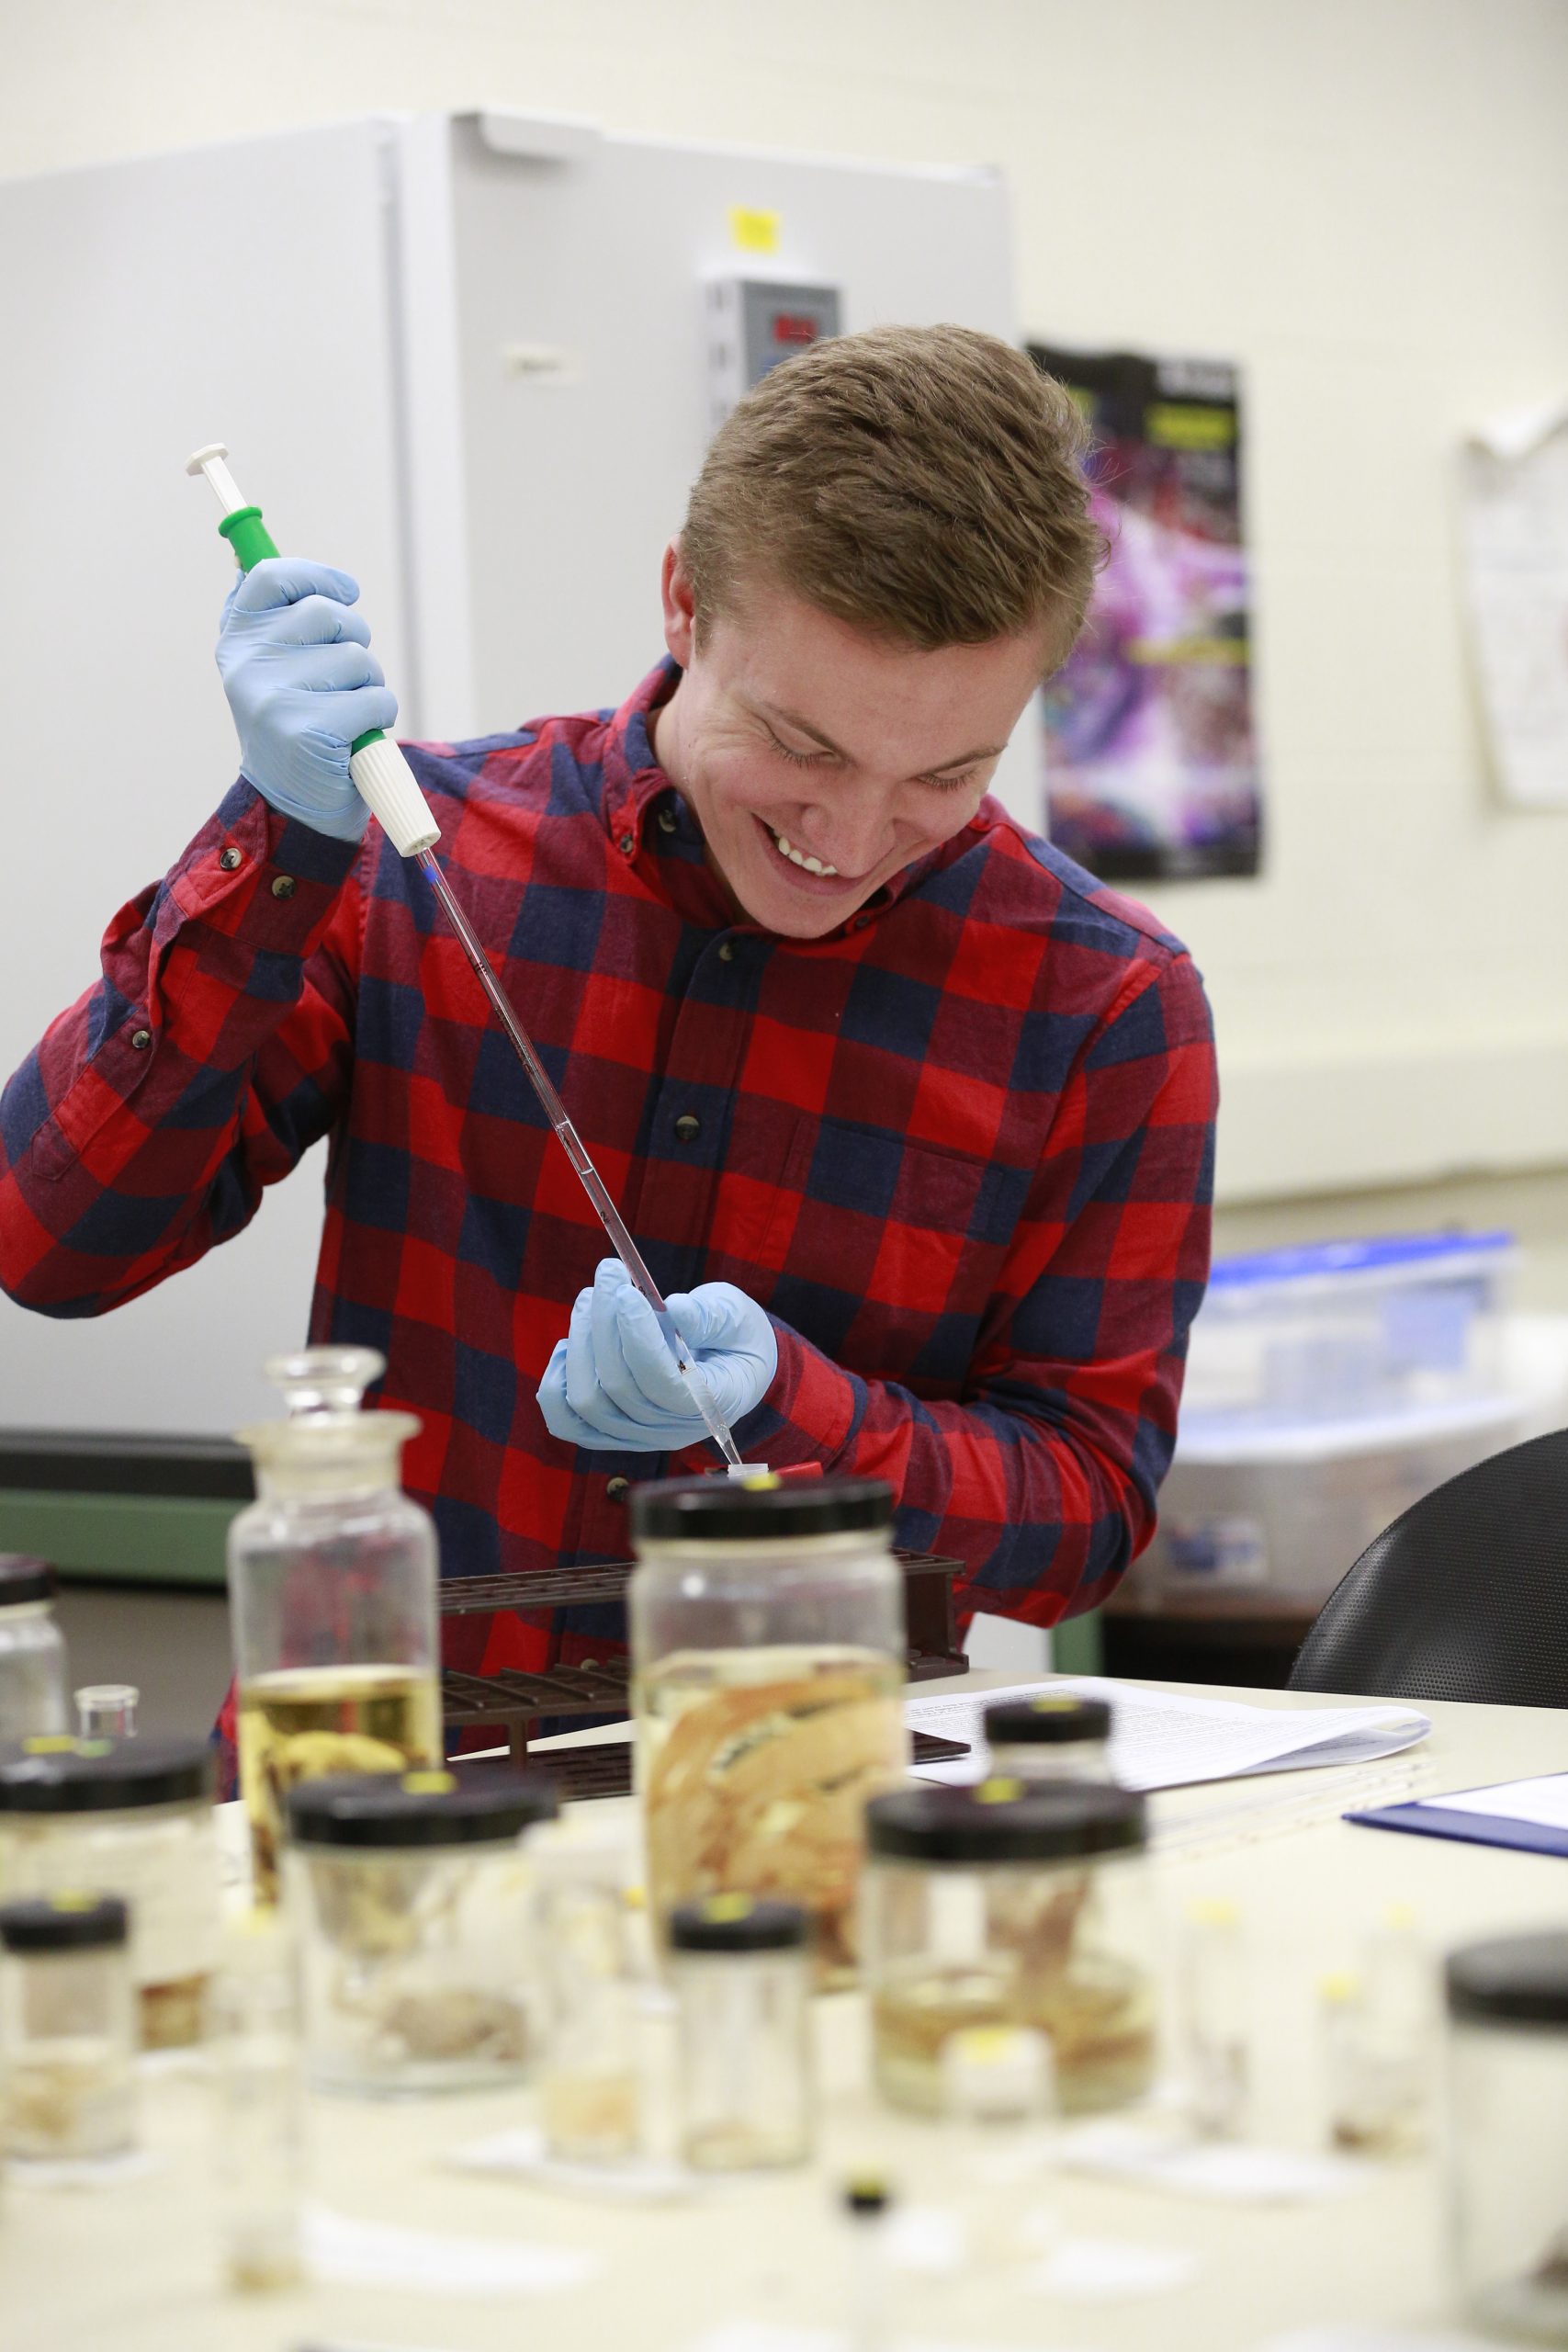 Male student in a science lab performing an experiment.